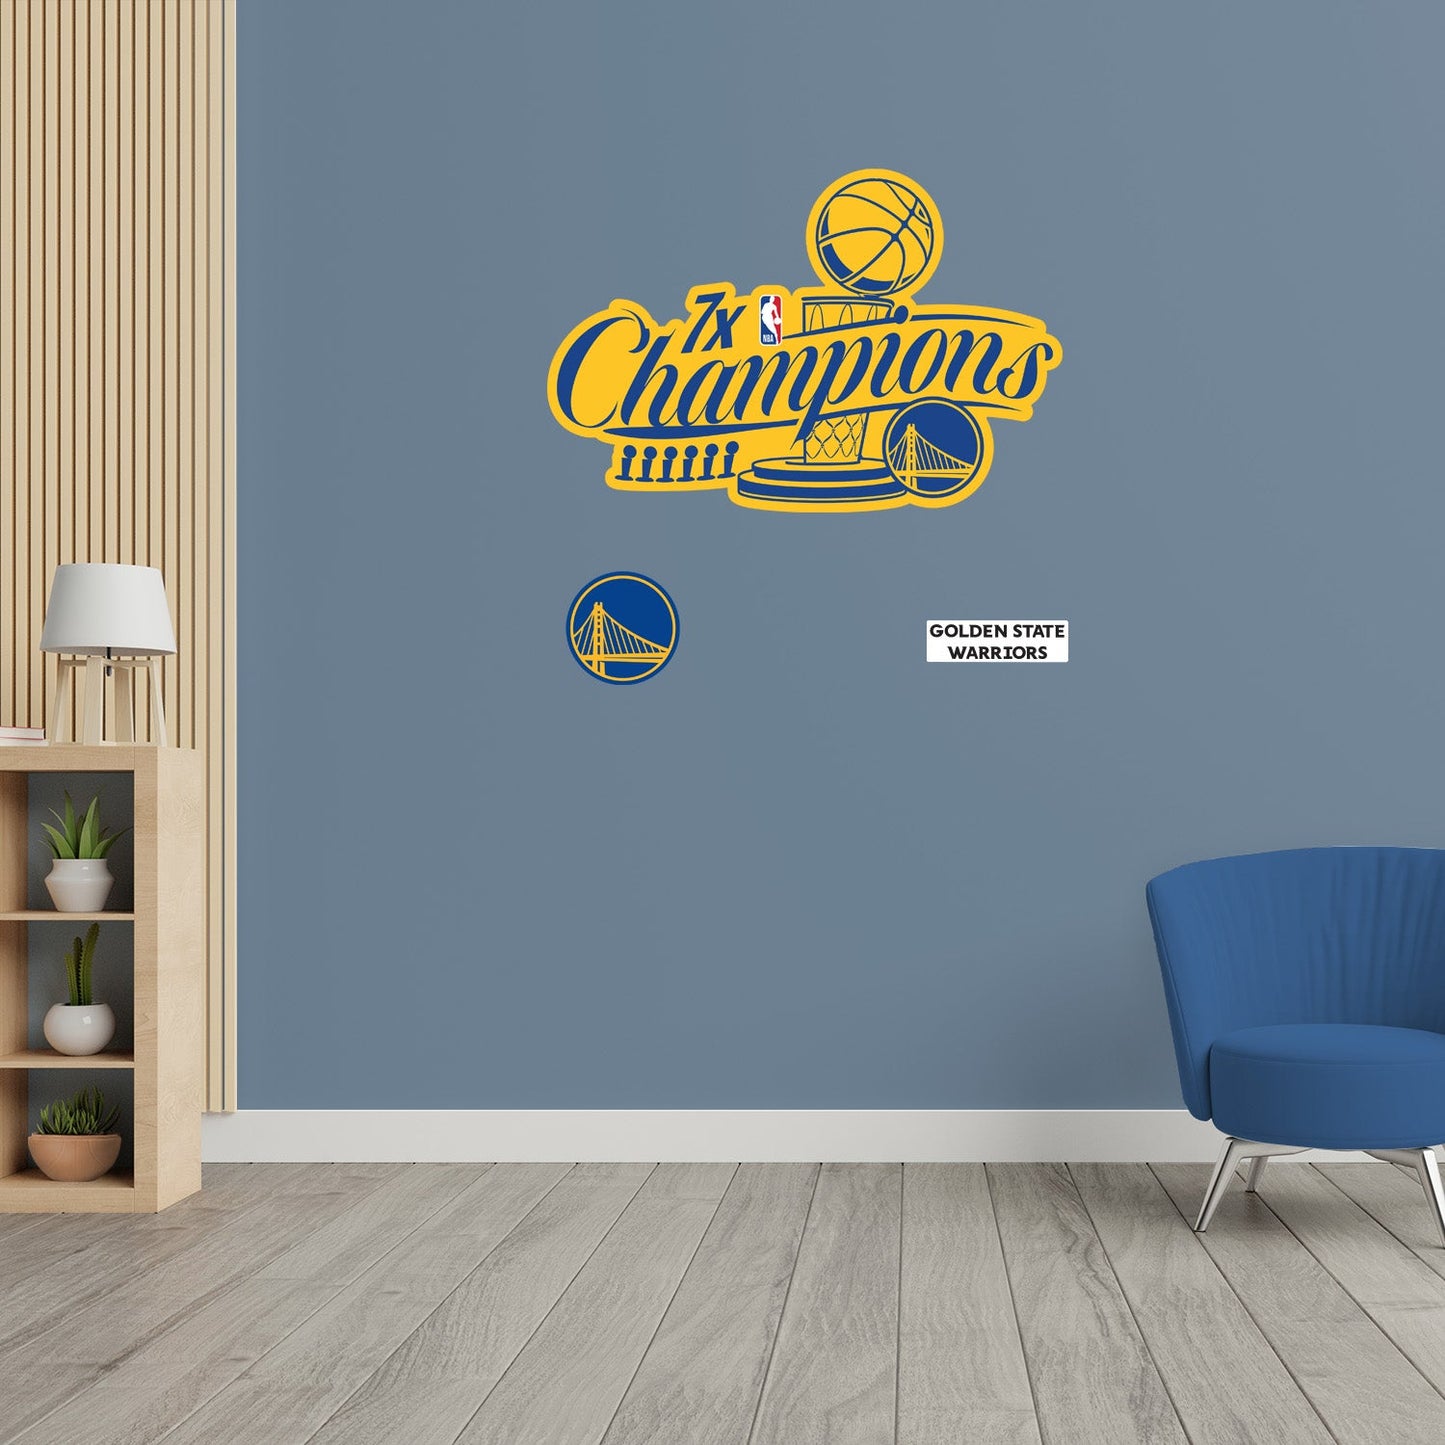 Golden State Warriors: 2022 7X Champions Logo - Officially Licensed NBA Removable Adhesive Decal